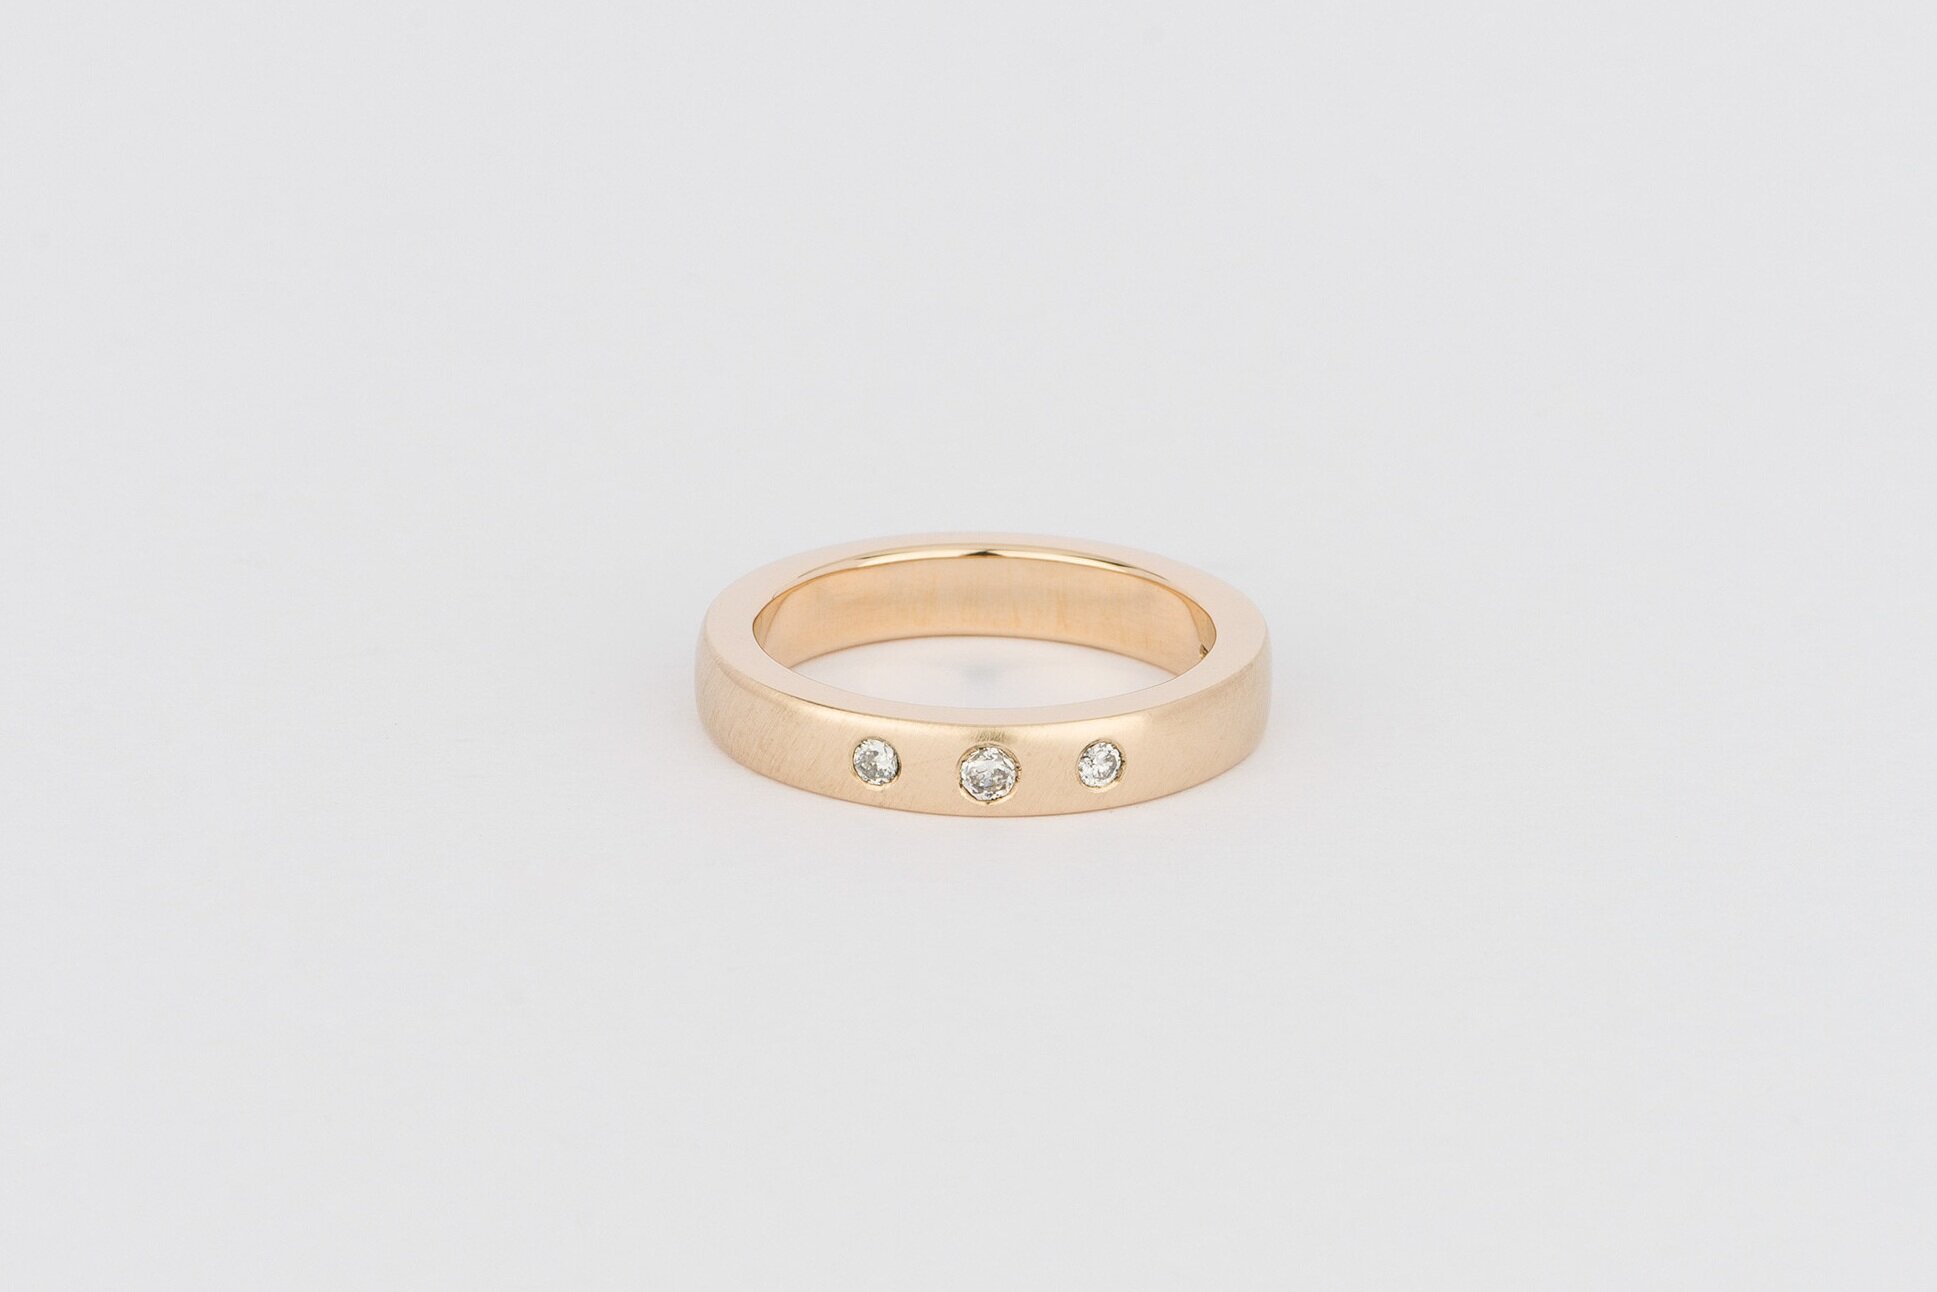  Recycled 9ct yellow gold ring set with customer’s own diamonds 